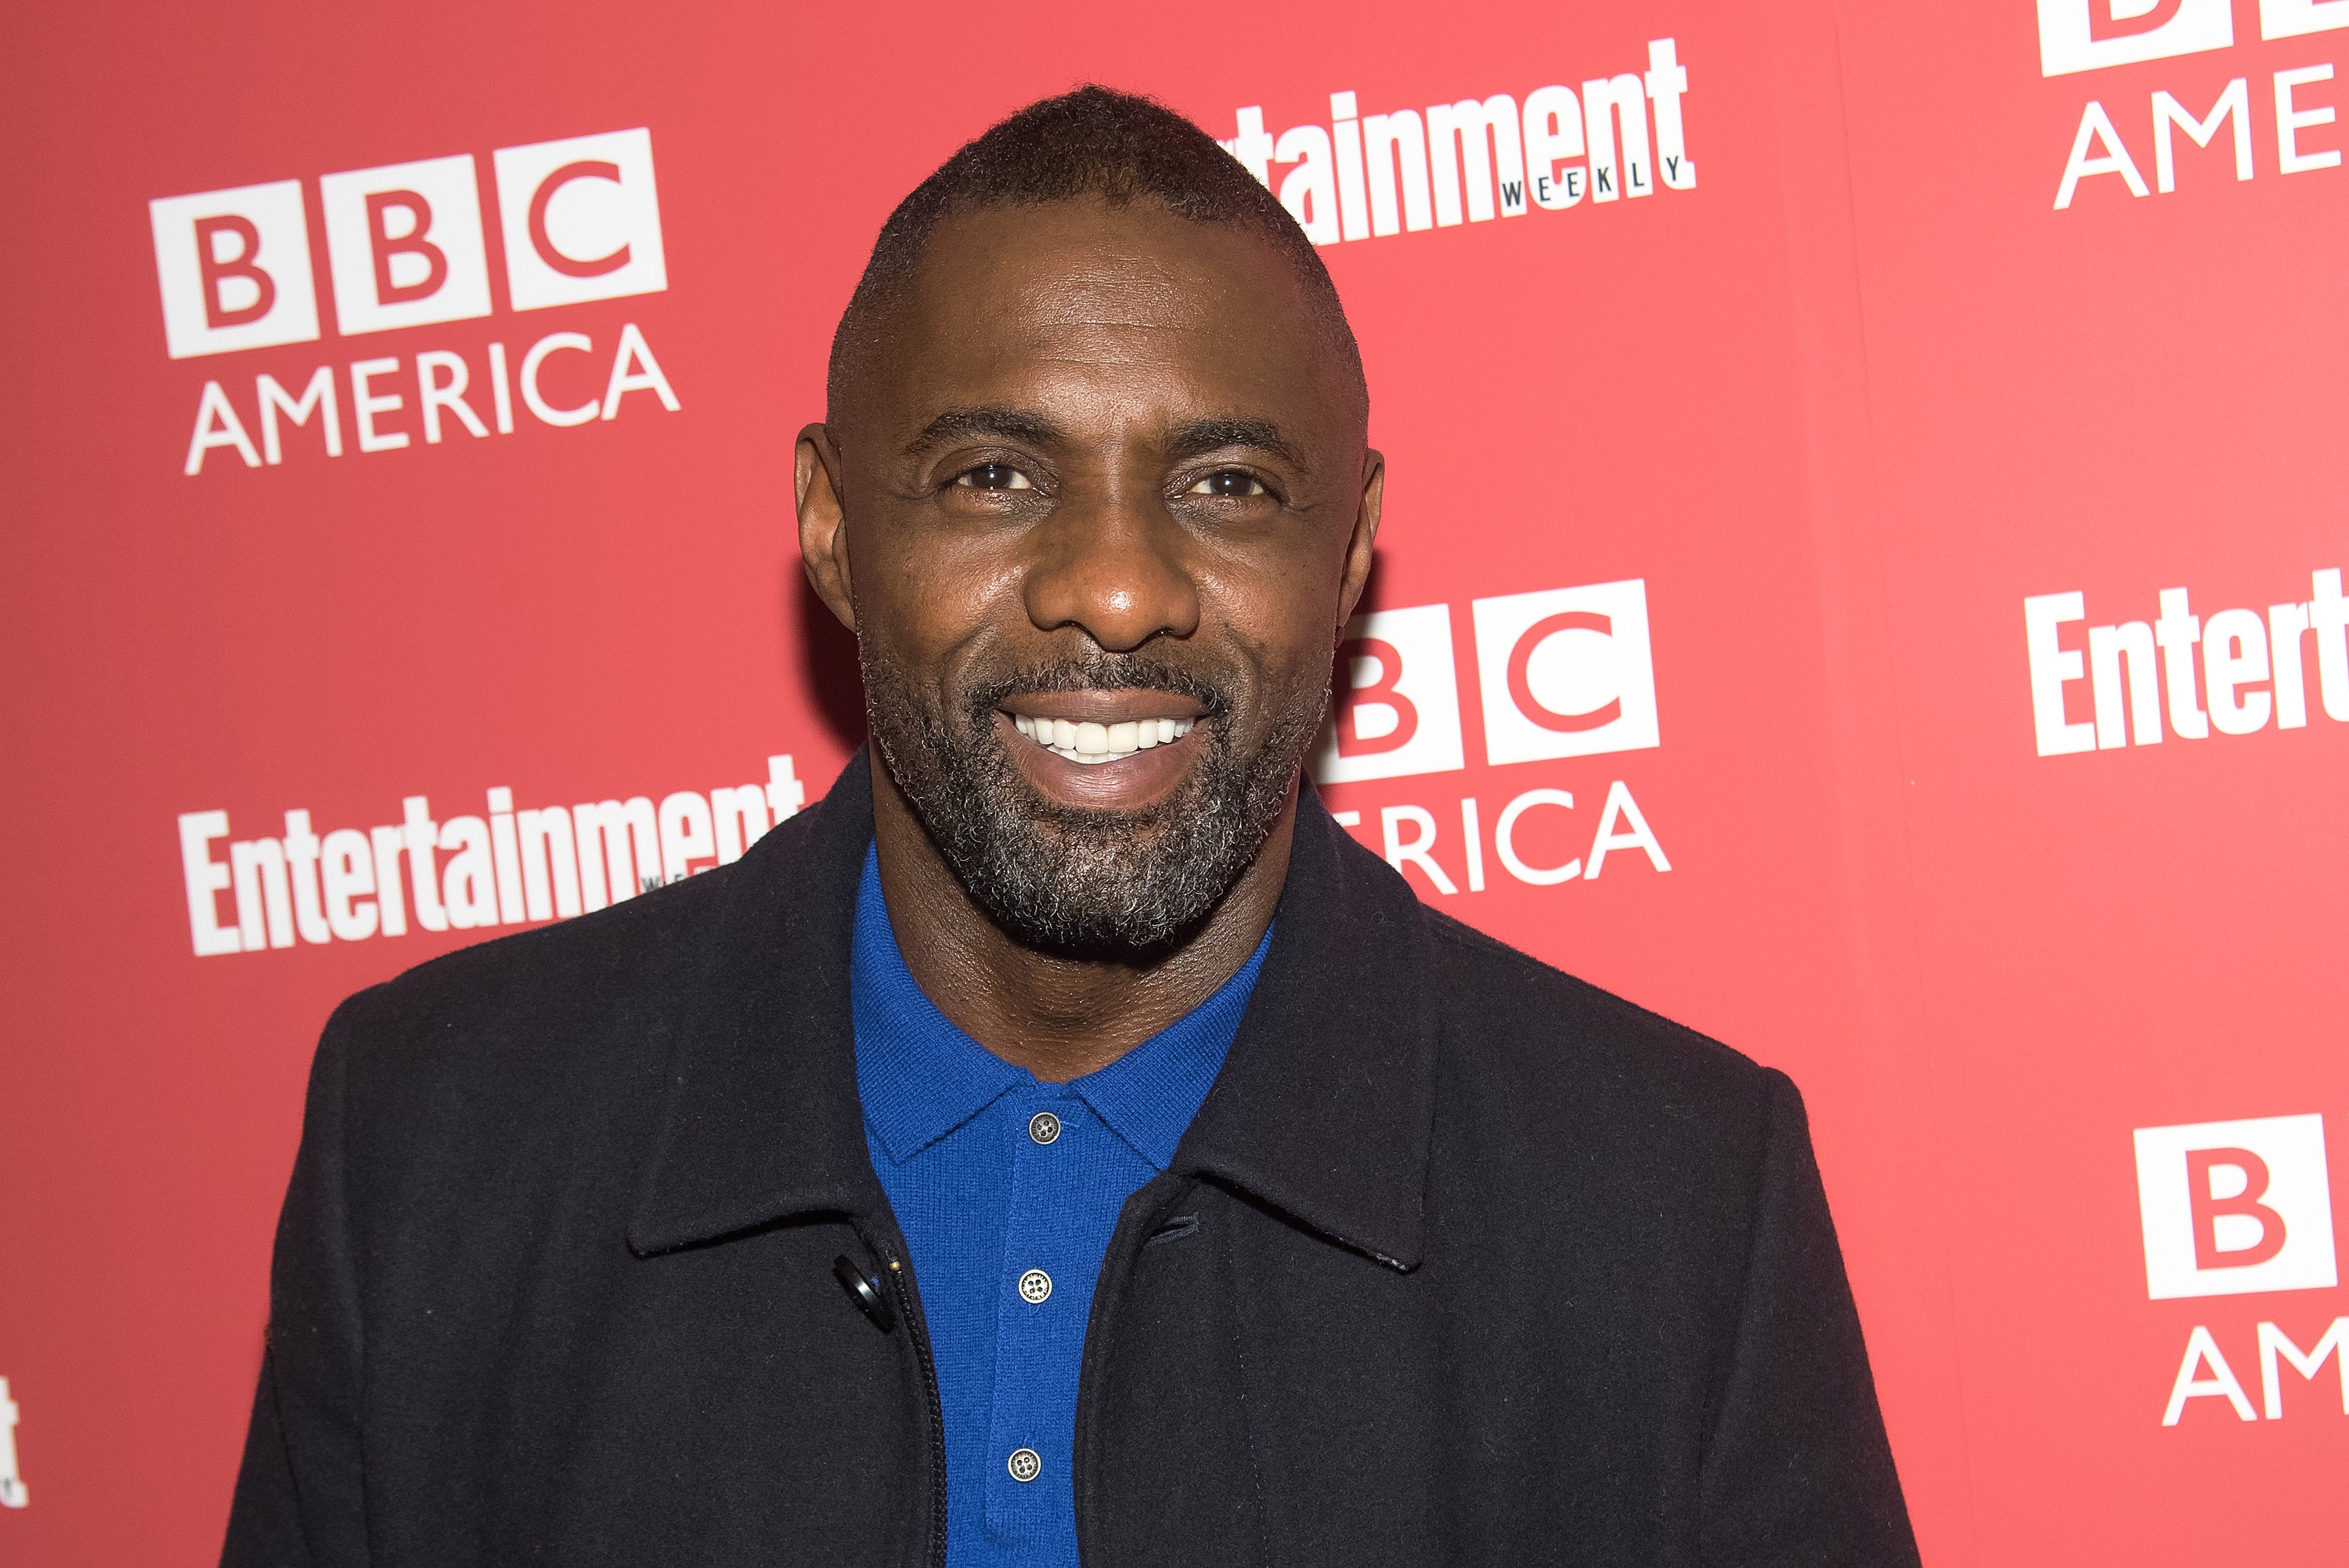 Idris Elba in a blue buttoned t-shirt and black jacket at the screening of his show 'Luther' in 2015.